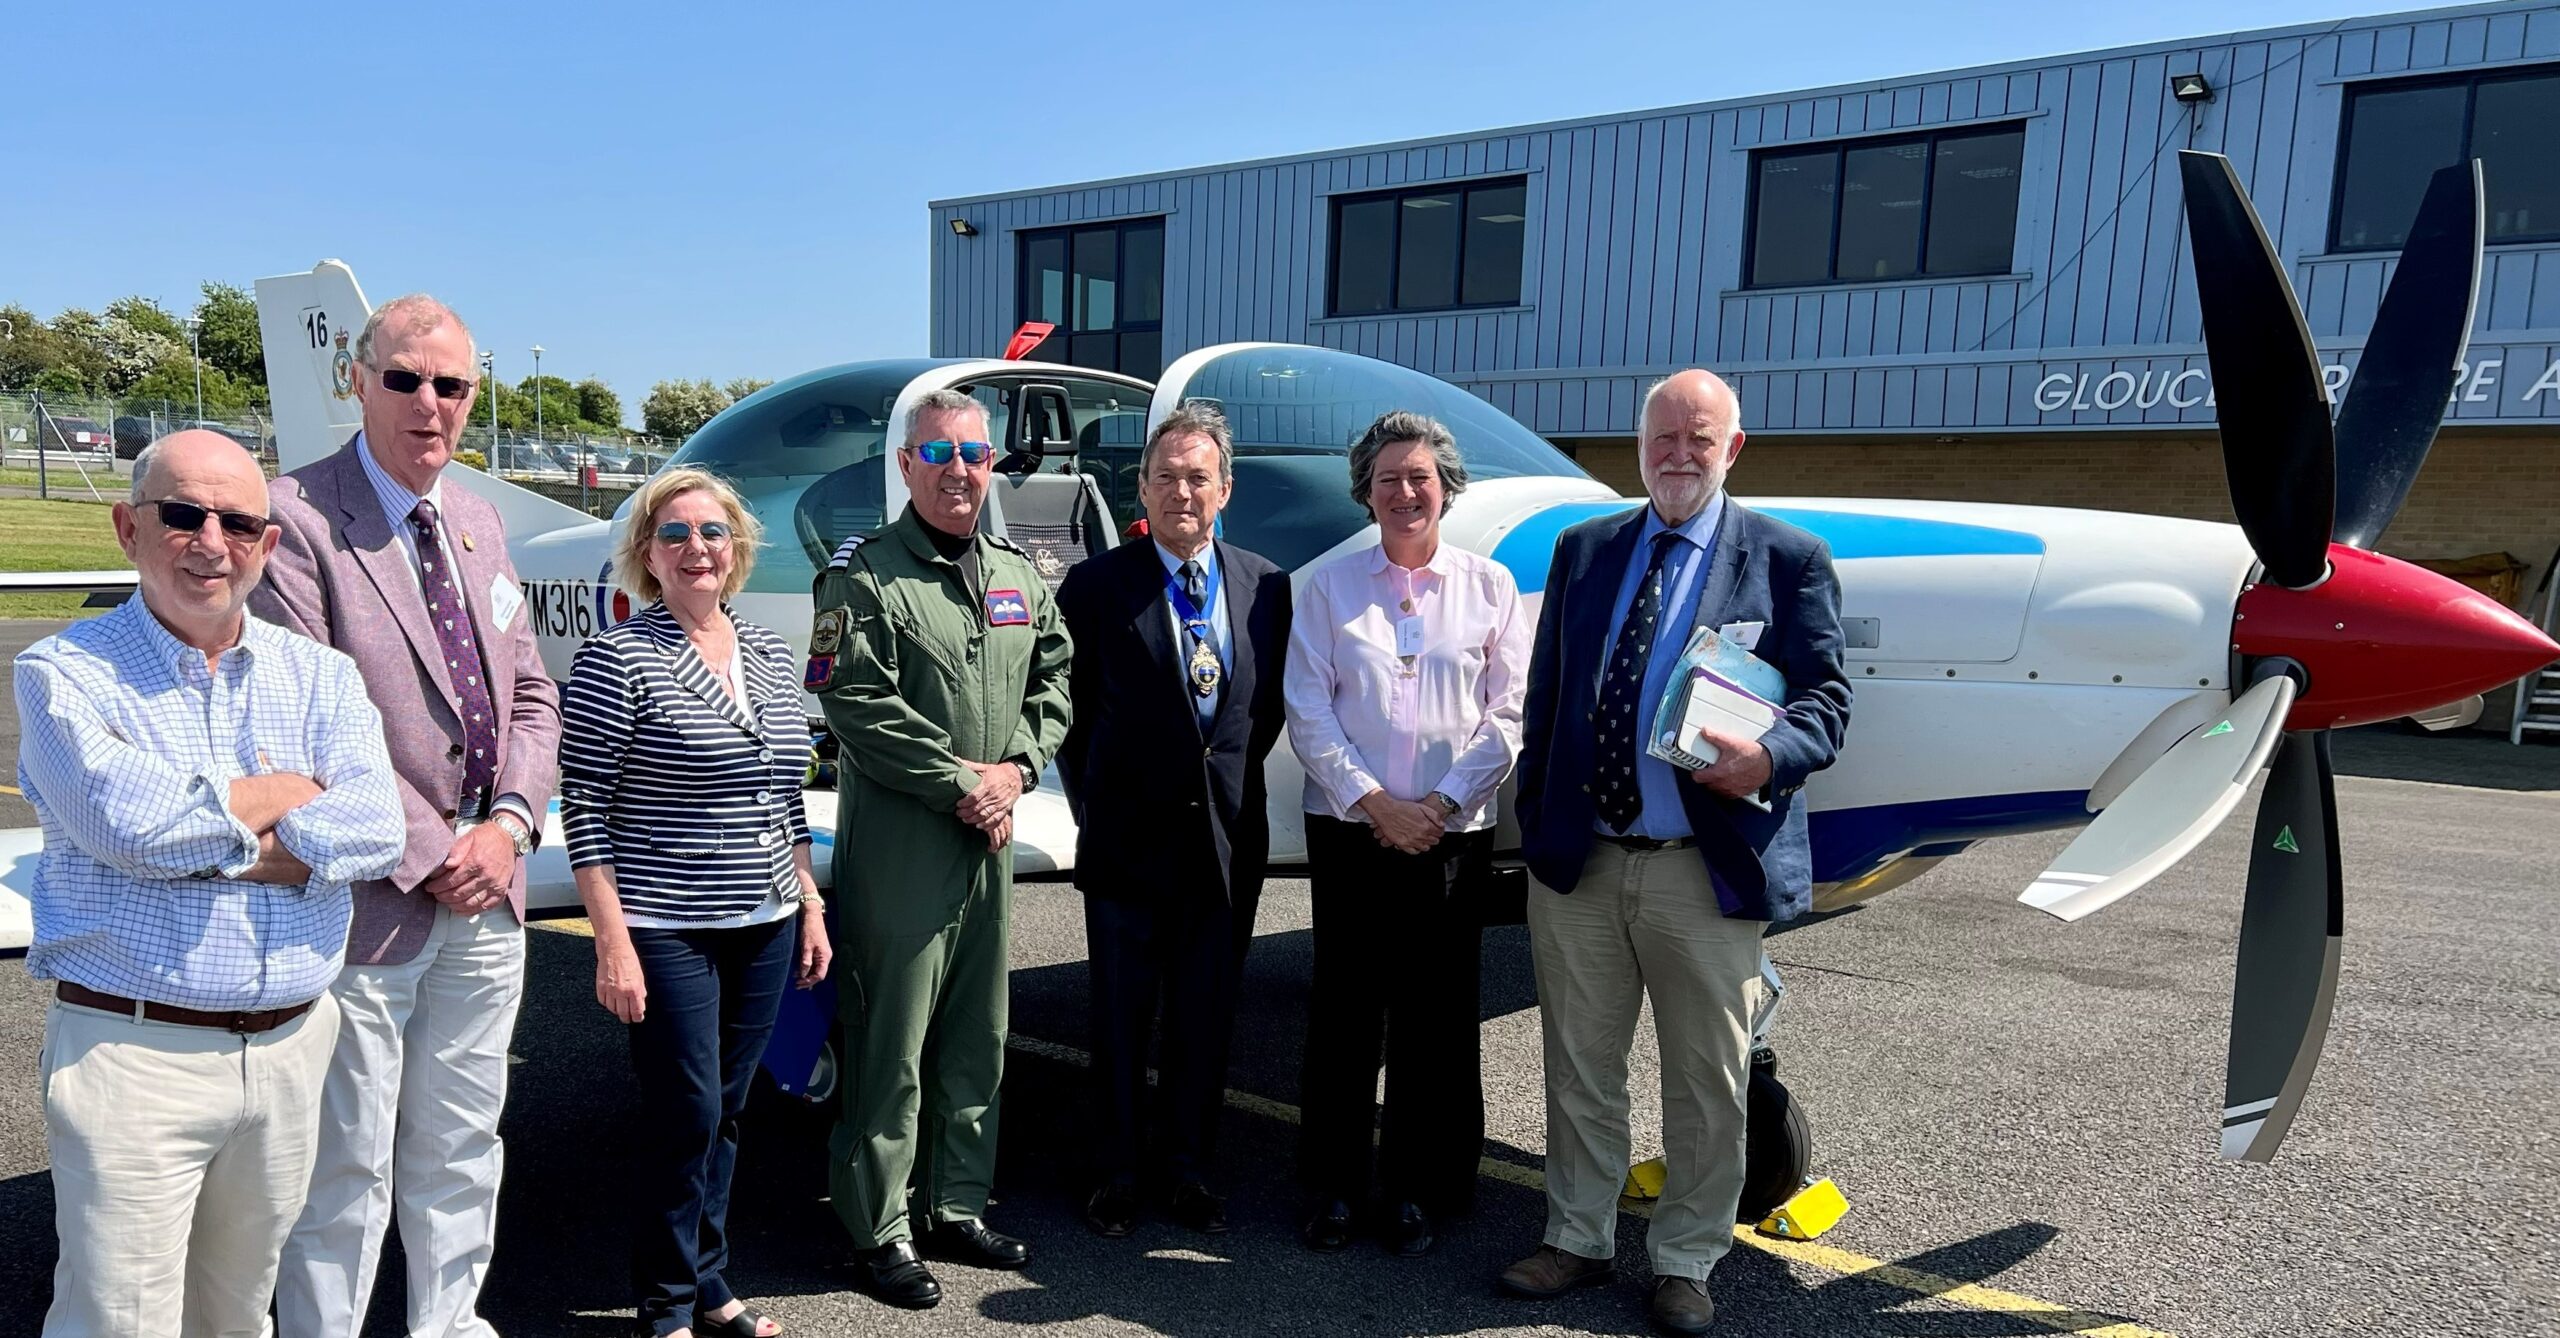 Air Pilots members at Gloucester Airport with PV